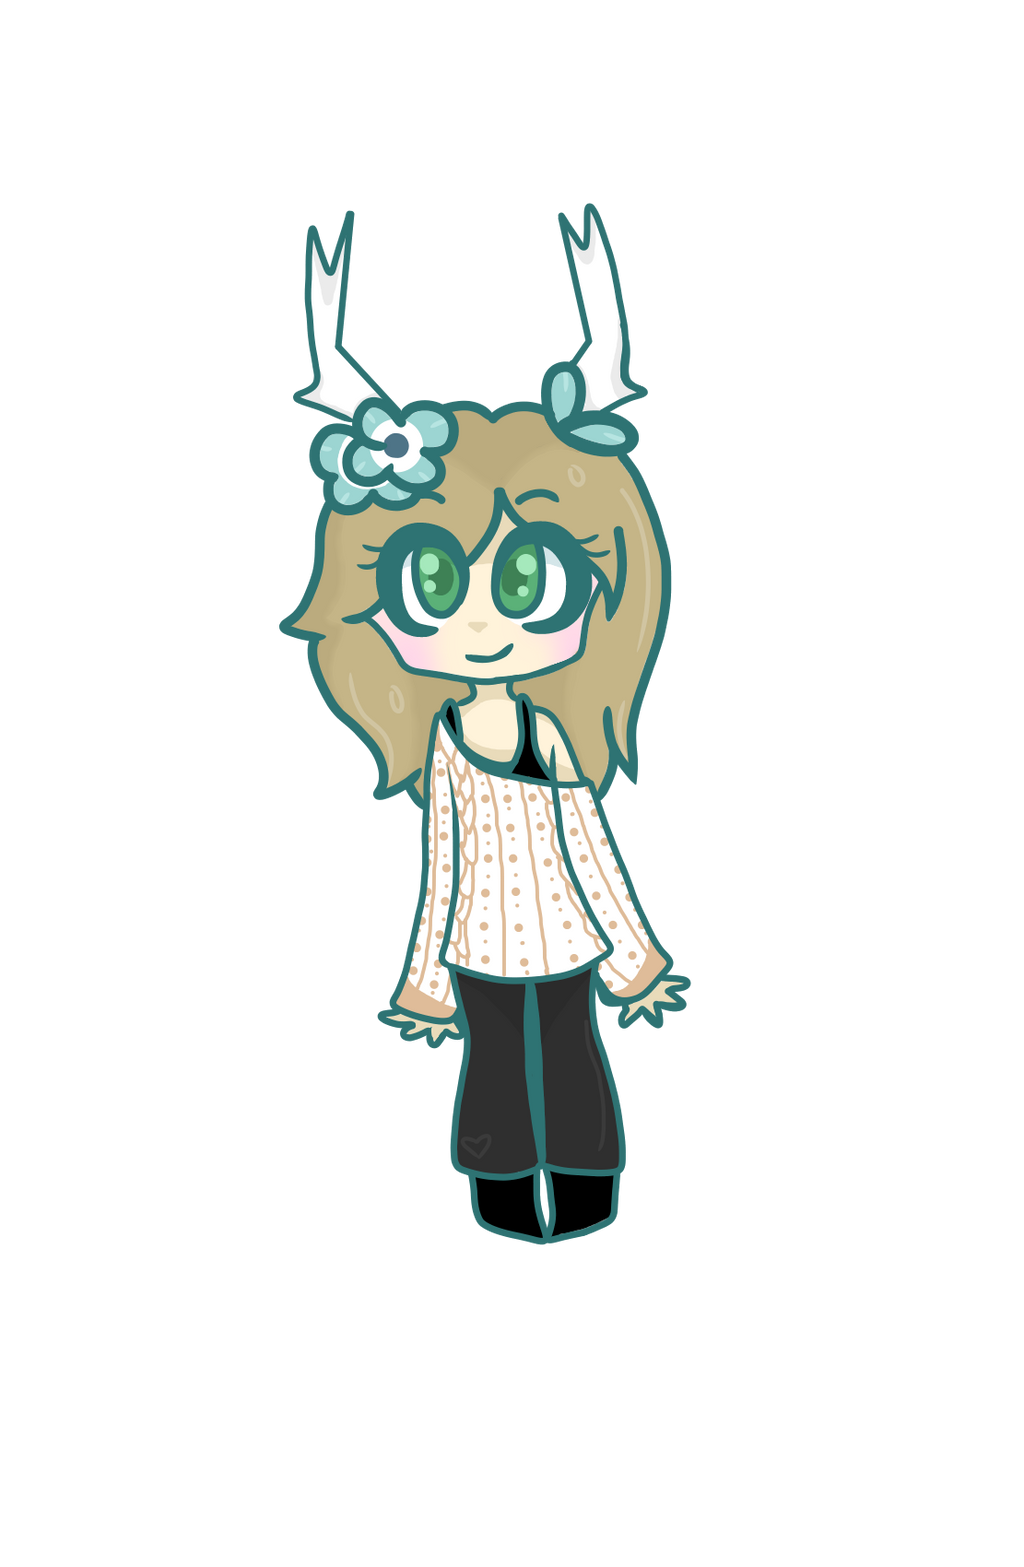 Alycat007s Roblox Character By Lol3909 On Deviantart - alycat007s roblox character by lol3909 on deviantart